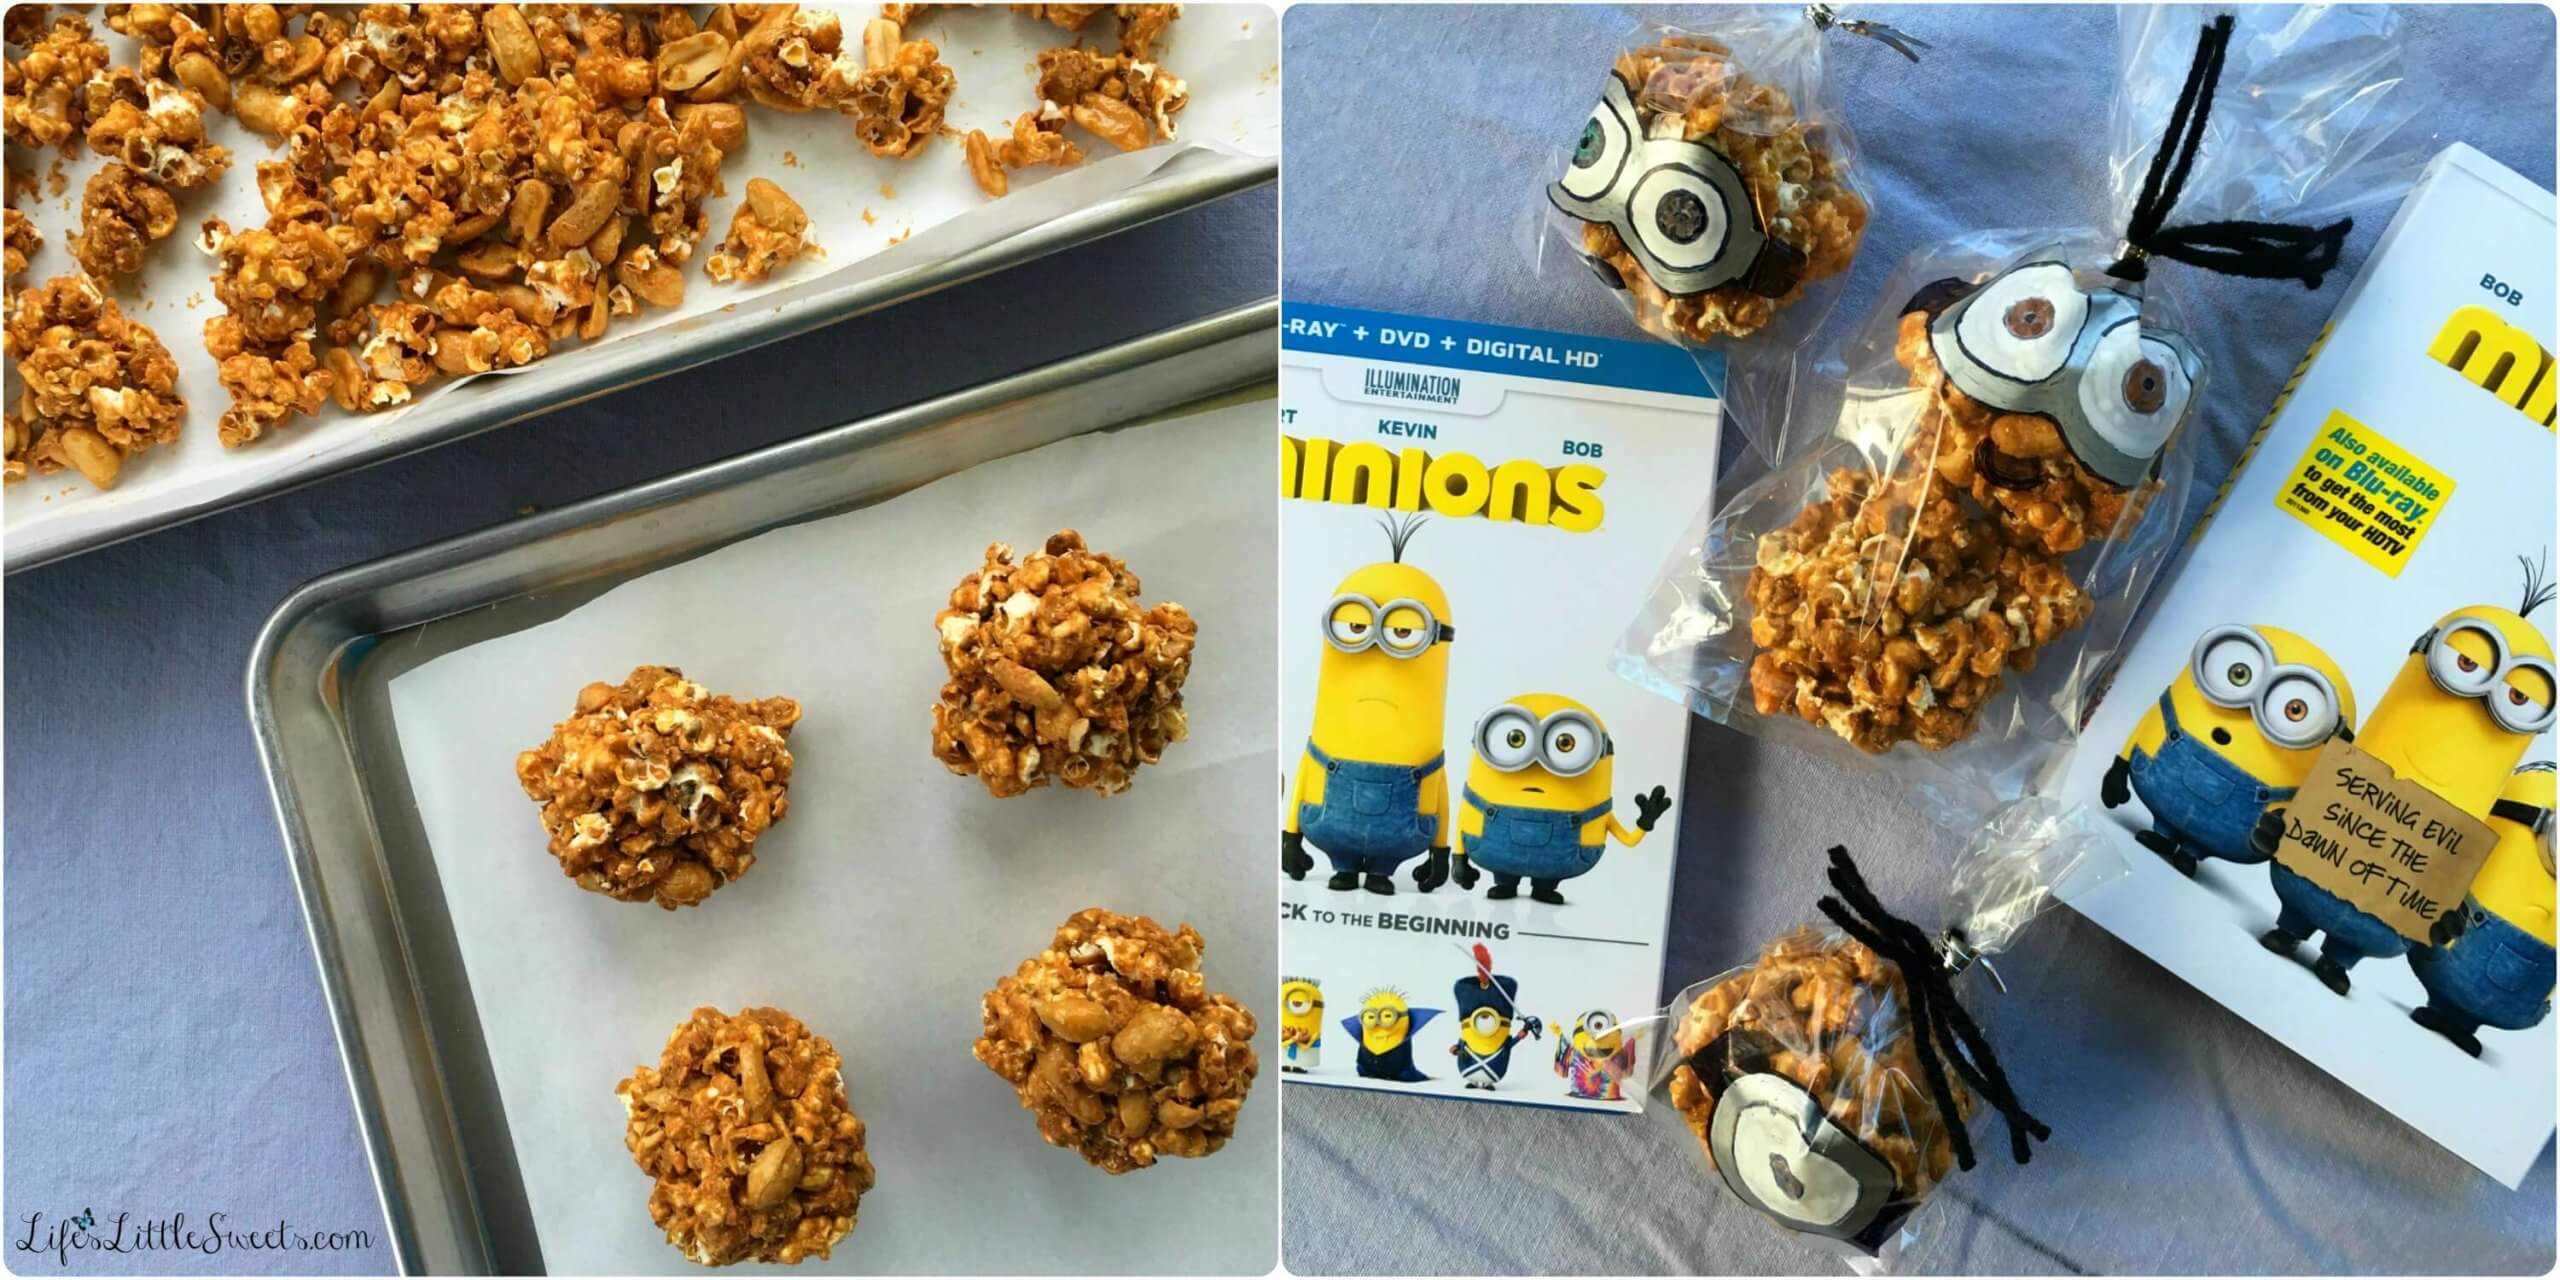 This easy and simple Caramel Popcorn Balls recipe has only 4 ingredients including homemade Dutch Oven Popcorn! Check out my full tutorial on illustrating the treat bags for the Caramel Popcorn Balls just like the Minions movie characters “Stuart,” “Kevin” and “Bob” within this post! Enjoy these Caramel Popcorn Balls during your #MinionsMovieNight! #MinionsMovieNight #ad #CollectiveBias